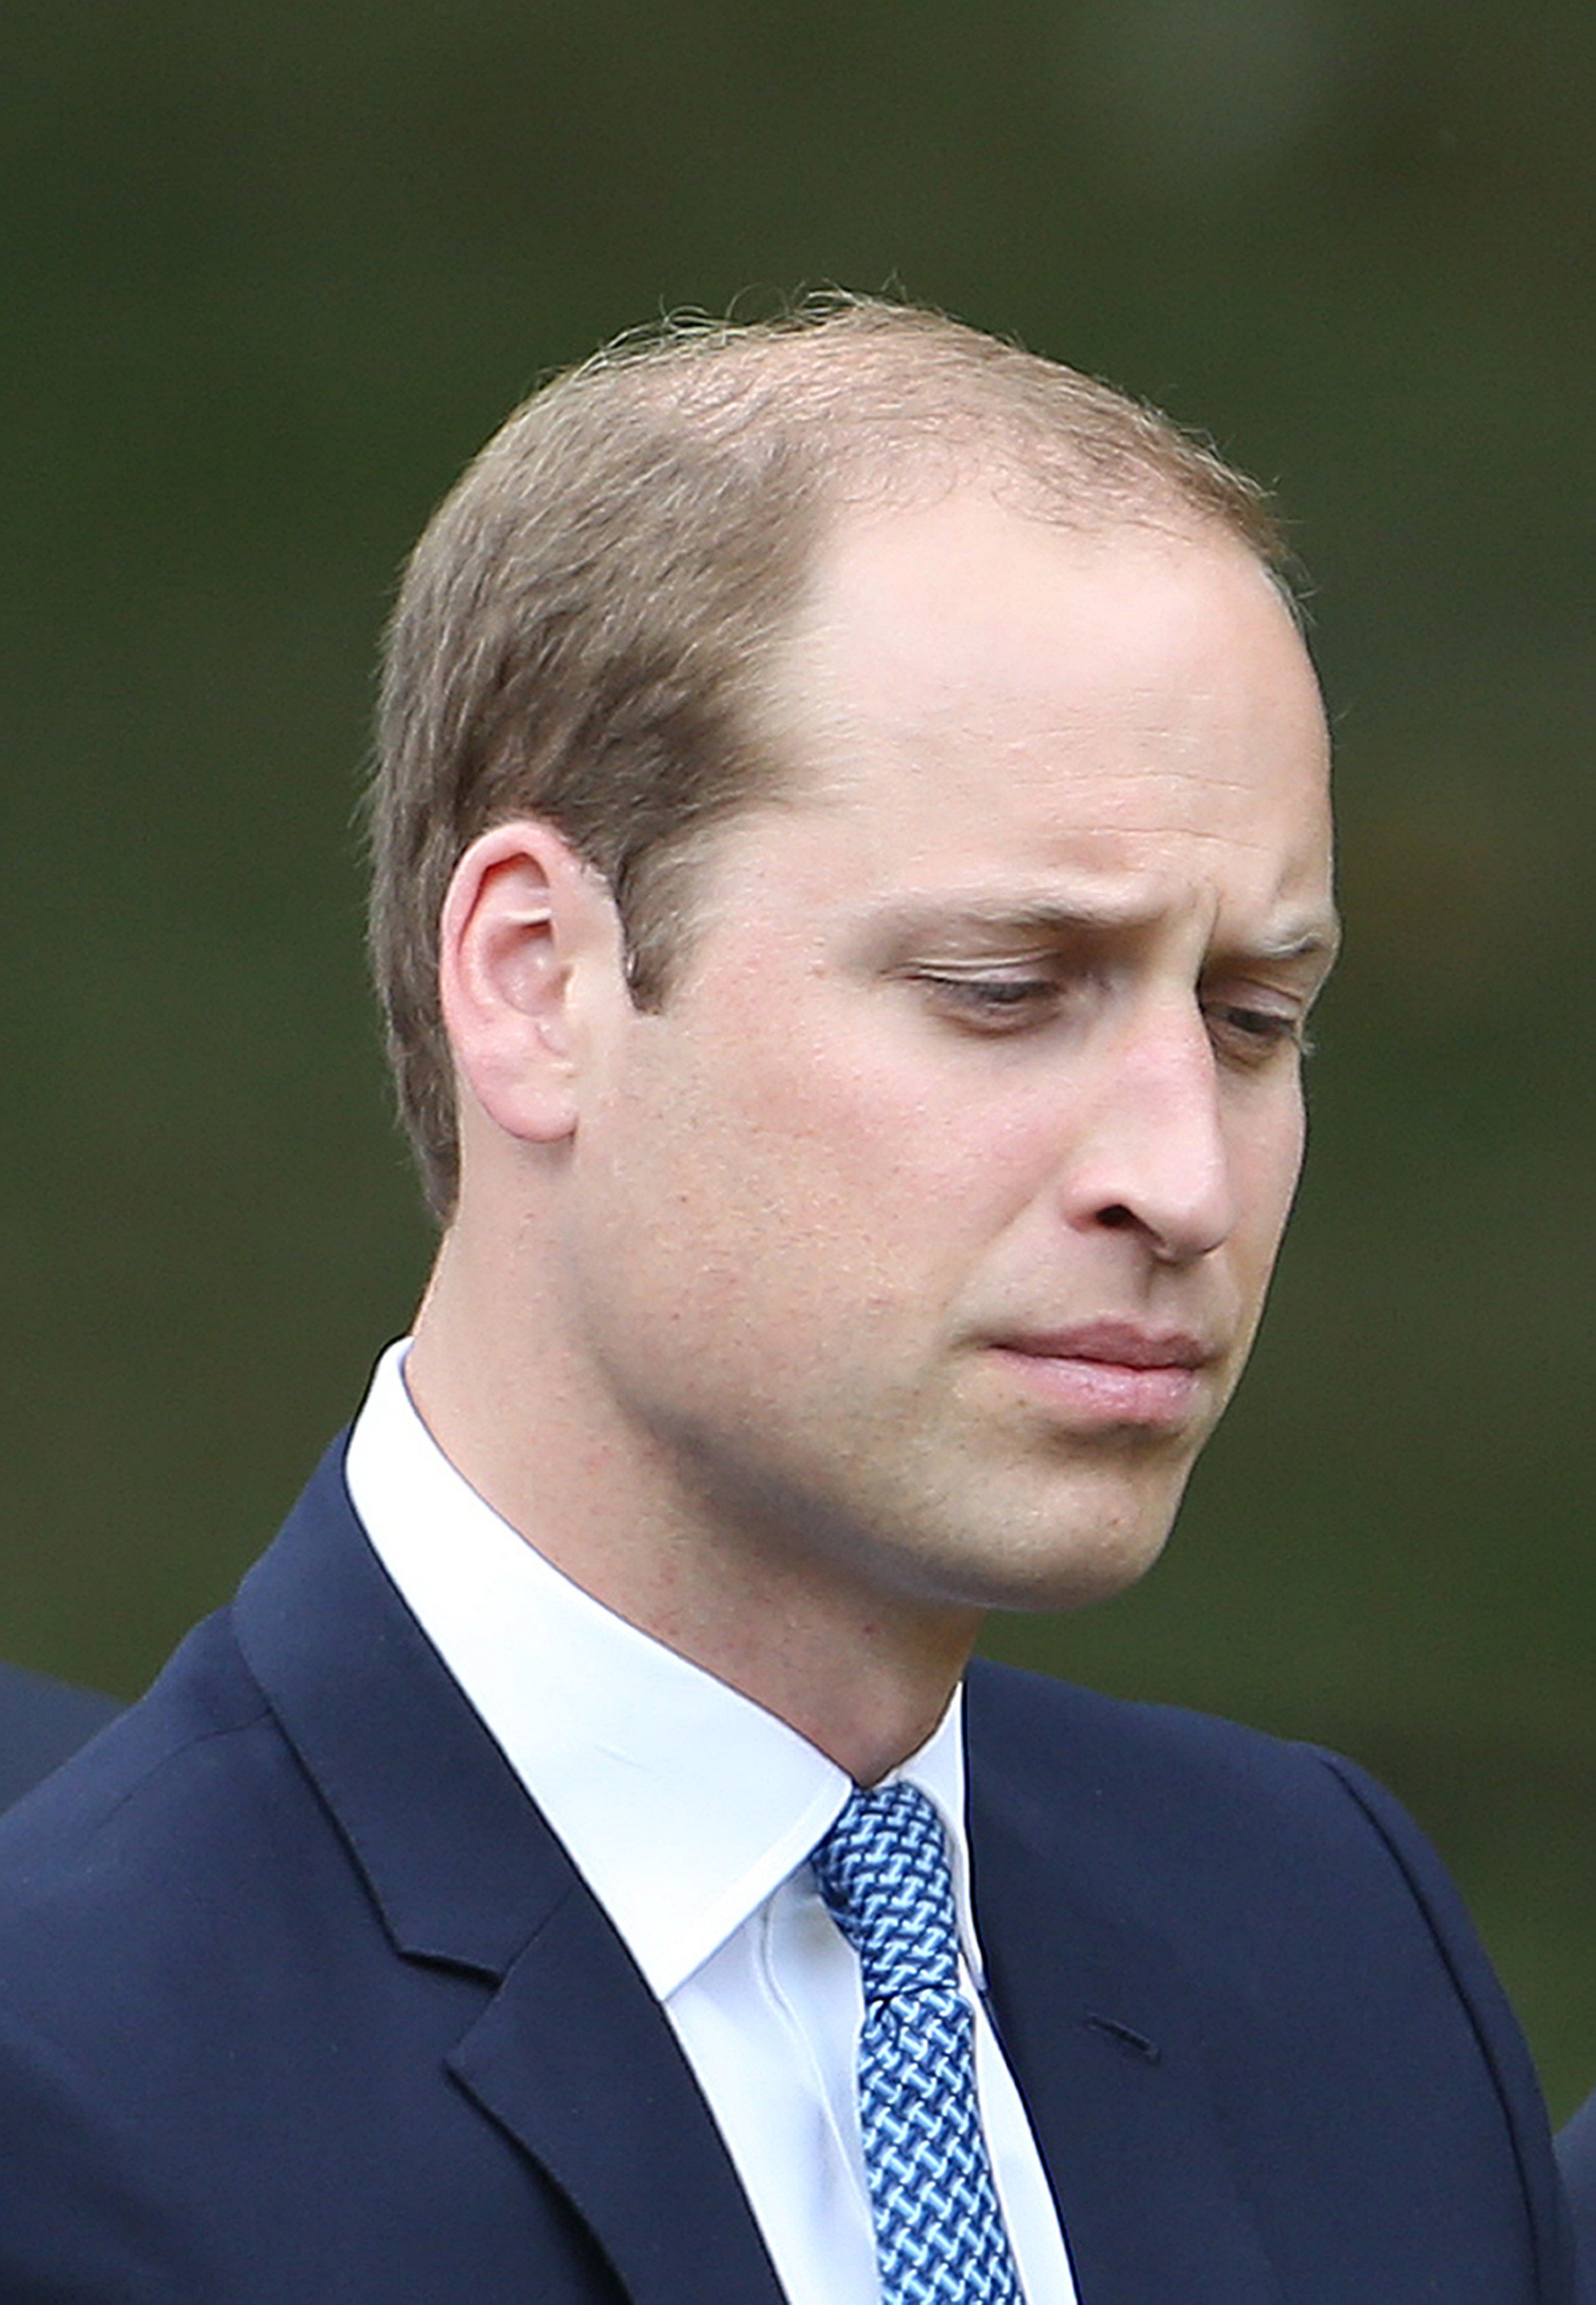 Britain's Prince William, Duke of Cambridge sits during a service at the 7/7 memorial in London's Hyde Park on July 7, 2015, | Source: Getty Images